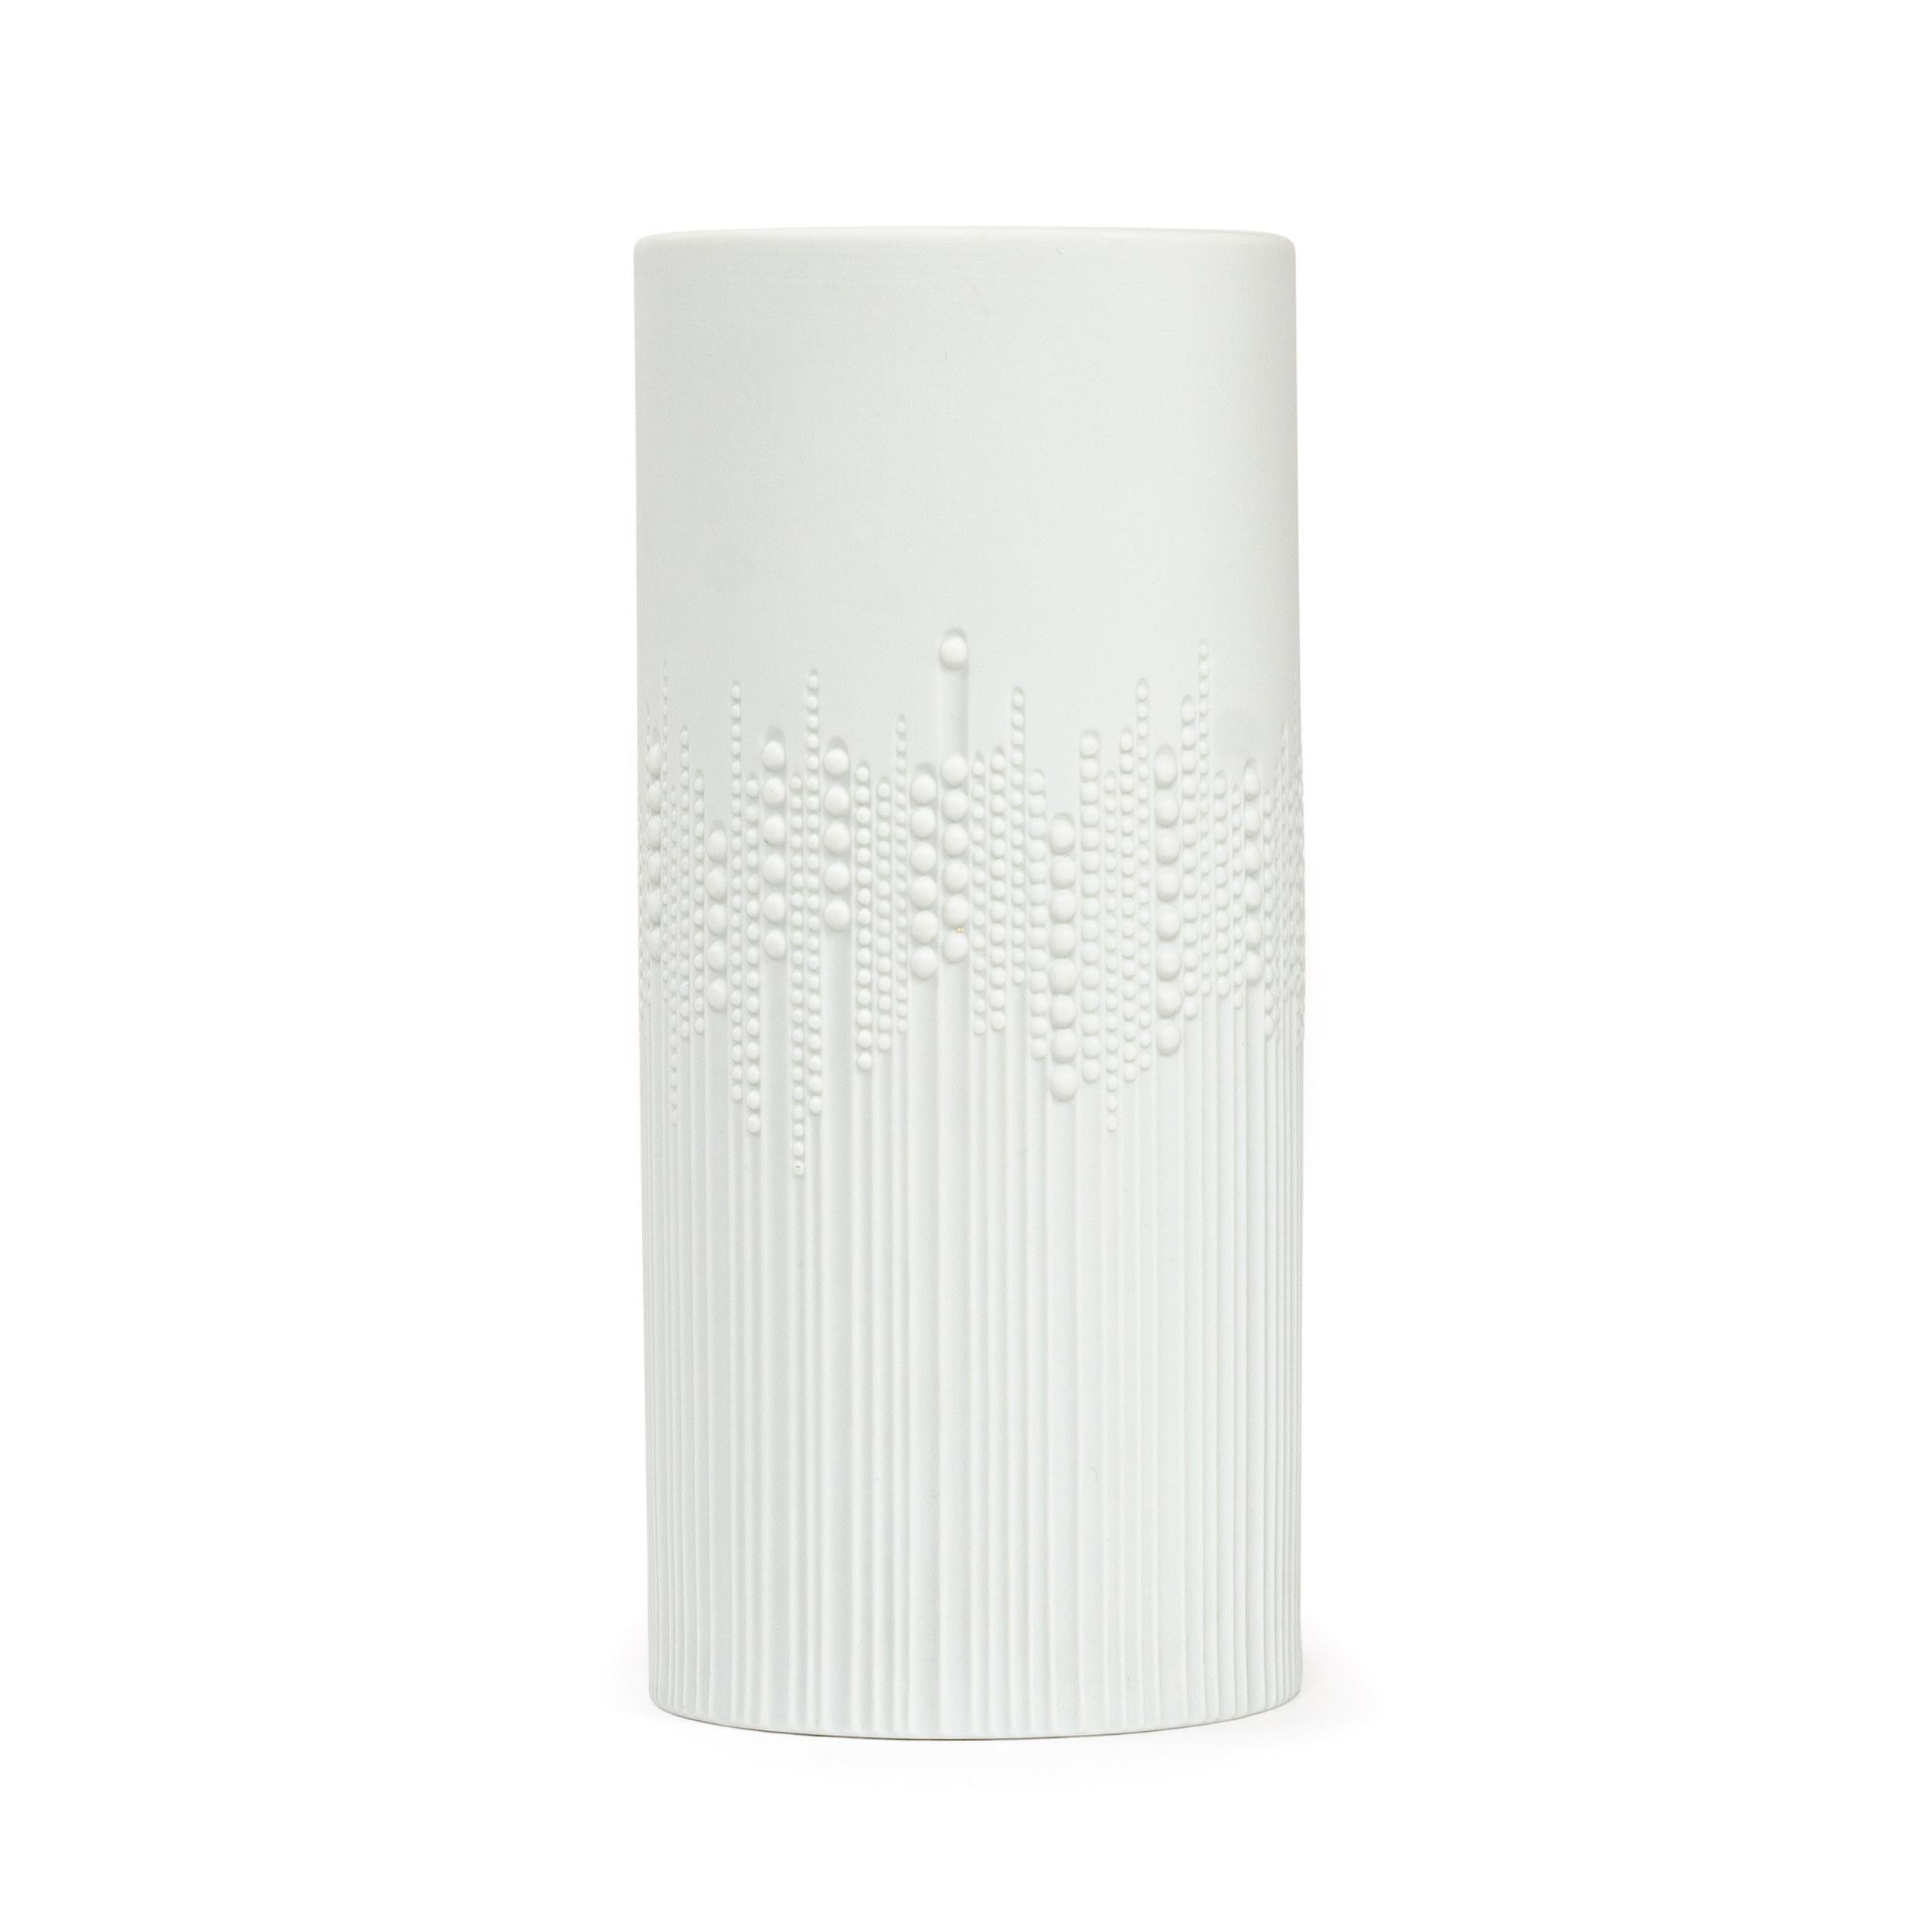 A tall, ovoid shaped white porcelain vase designed in 1970 by Tapio Wirkkala for Rosenthal Studio Line ‘Drops’ pattern as the tactile design on its exterior has raised dots, like rain droplets, against grooved channels. Matte finish exterior with a